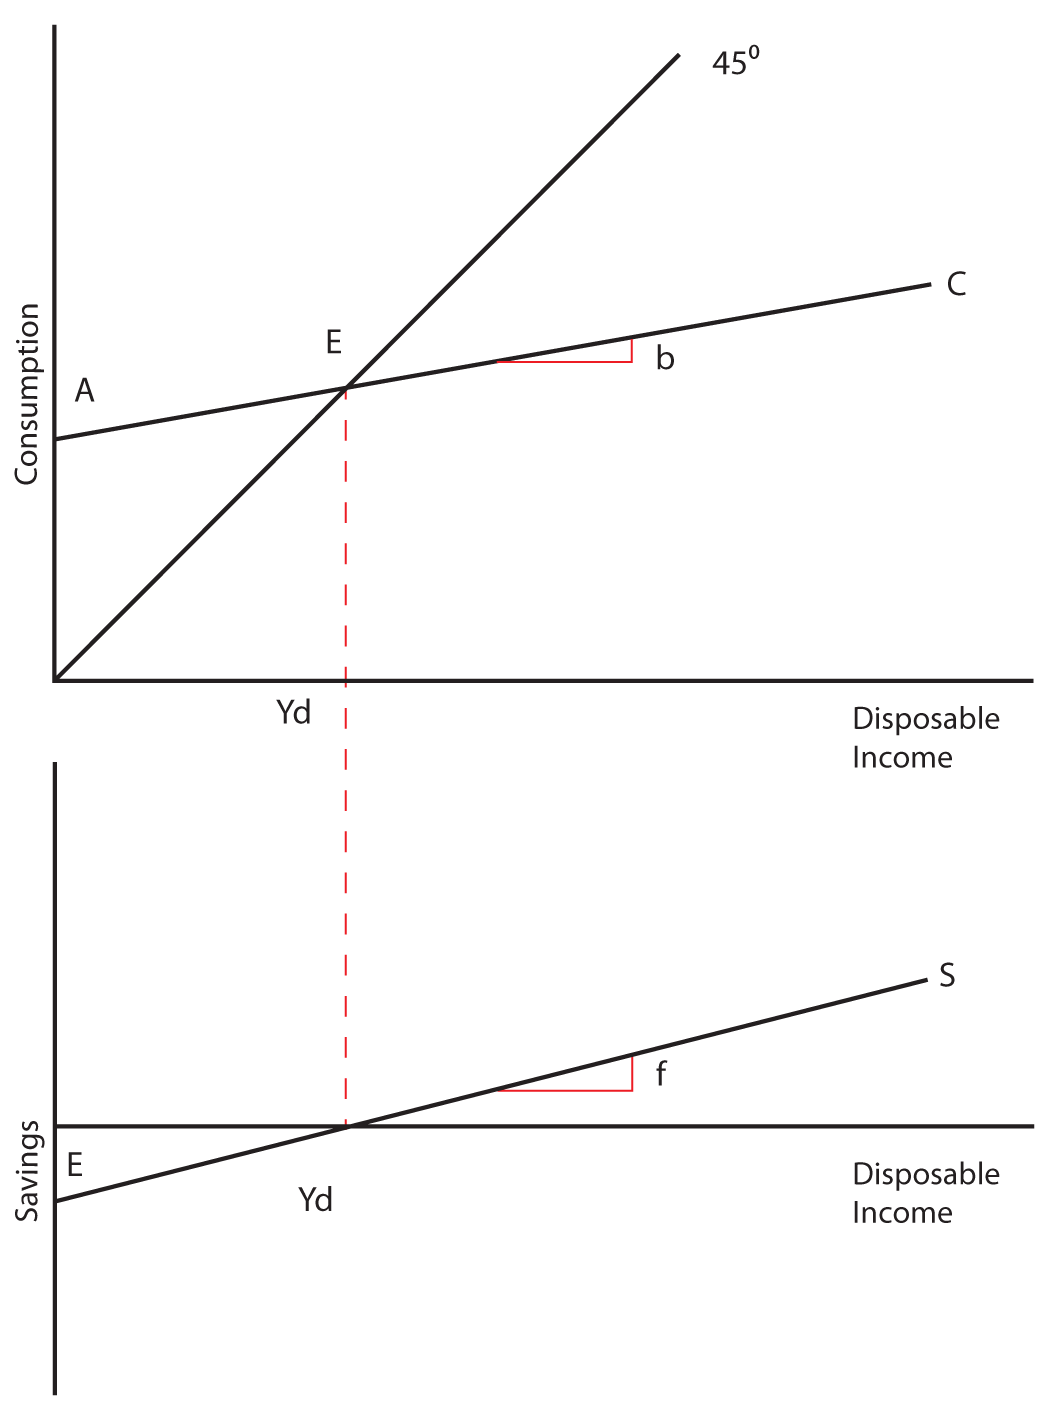 Image 6.02. This image includes two graphs. The first graph depicts Disposable Income on the X axis and Consumption on the Y axis. The X axis is also labeled with the abbreviation Yd. A line beginning at the origin follows an increasing slope at a 45 degree angle as the X value increases; this line is labeled 45 degrees. A second line beginning higher on the Y axis follows an increasing slope, at less than a 45 degree angle, as the X value increases; it is labeled A at the point it touches the Y axis and is labeled C at its other end. The point where these two lines intersect is labeled E. To the right of point E, along line AC, one solid red line comes horizontally from line AC to meet up with another solid red line coming vertically off of line AC. The two red lines form a right angle labeled b, which is used to determine the slope of line AC. This is the end of the description of the image's first graph. Below the first graph is a second graph. This second graph shows Savings on the Y axis. Midway through the Y axis, a horizontal line extends that is labeled Disposable Income. This line is also labeled with the abbreviation Yd. A second line beginning lower on the Y axis follows an increasing slope as the X value increases; it is labeled E at the point it touches the Y axis and is labeled S at its other end. The point where the first line and second line intersect is not labeled. To the right of the intersection, along line ES, one solid red line comes horizontally from line ES to meet up with another solid red line coming vertically off of line ES. The two red lines form a right angle labeled f, which is used to determine the slope of line ES. This is the end of the description of the image's second graph. The first graph and second graph are connected by a dotted red line. The dotted red line descends from point E on the first graph, descends down past the first graph's X axis, and connects with the second graph below at the point where the second graph's two lines intersect.